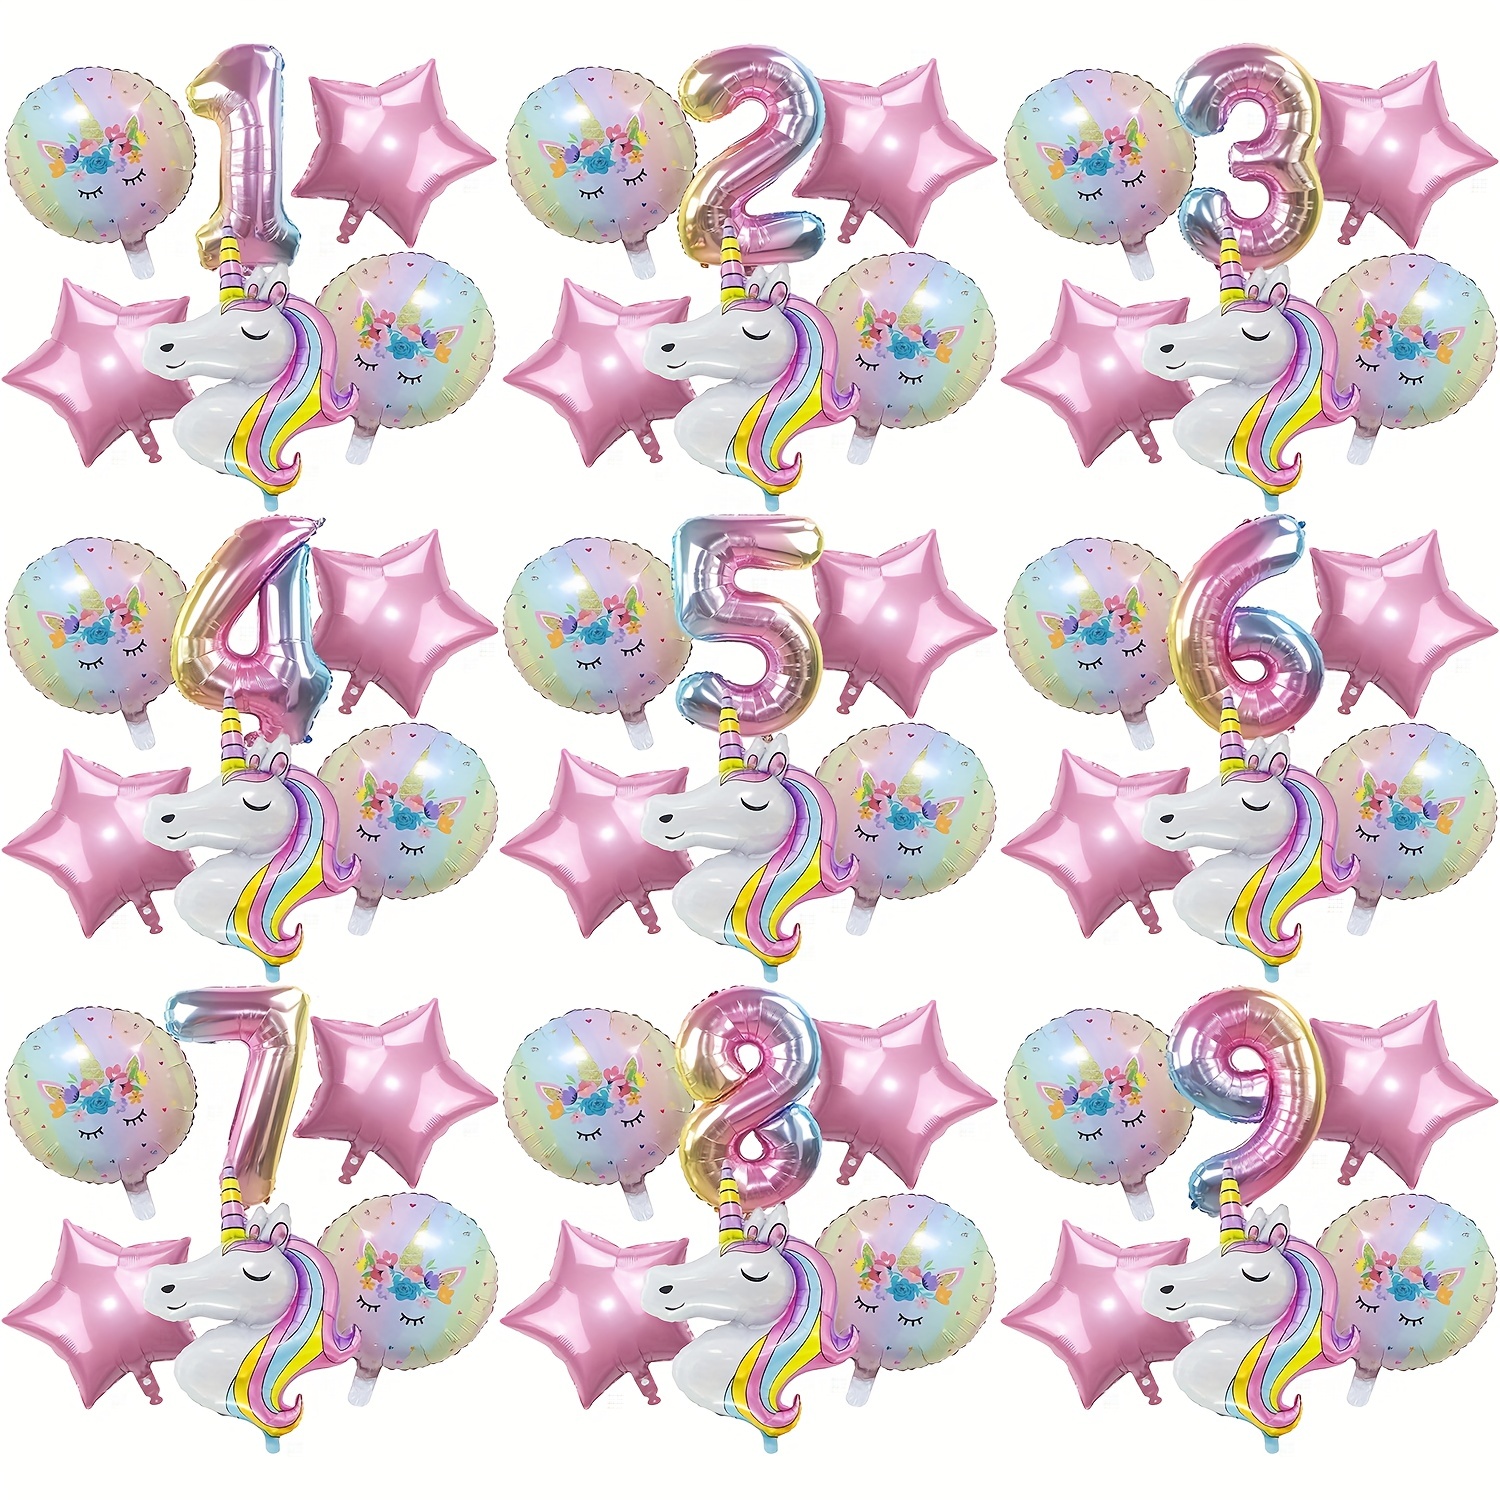  Cute Rainbow Party Favors Keychains 24 Sets Pink Rainbow  Unicorn Party Goodie Gifts with Thank You Kraft Tags And White Gift Bags  For Girls Baby Shower Birthday Party Decoration Supplies Return